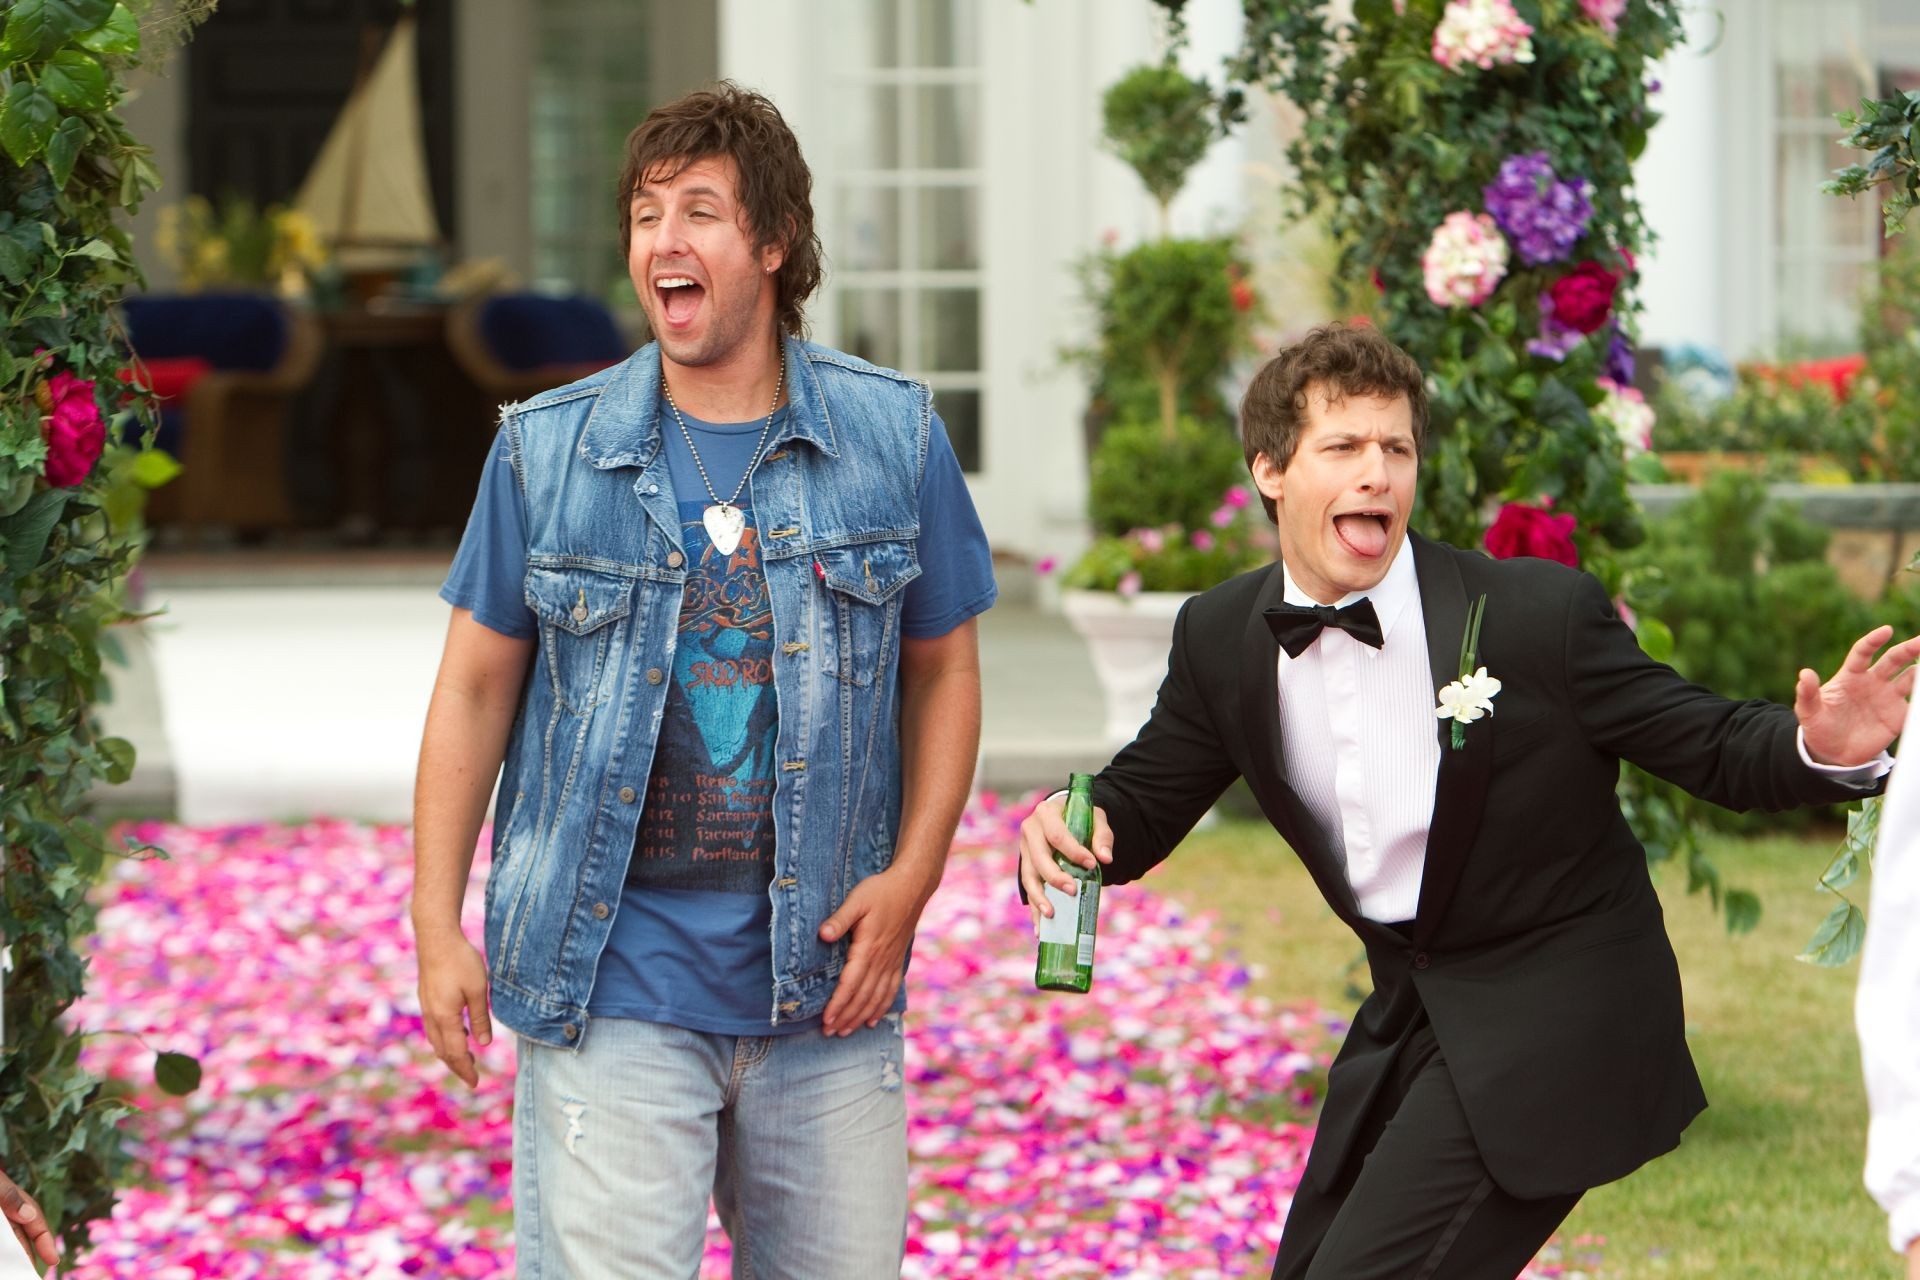 Adam Sandler stars as Donny Berger and Andy Samberg stars as Todd Peterson in Columbia Pictures' That's My Boy (2012). Photo credit by Tracy Bennett.